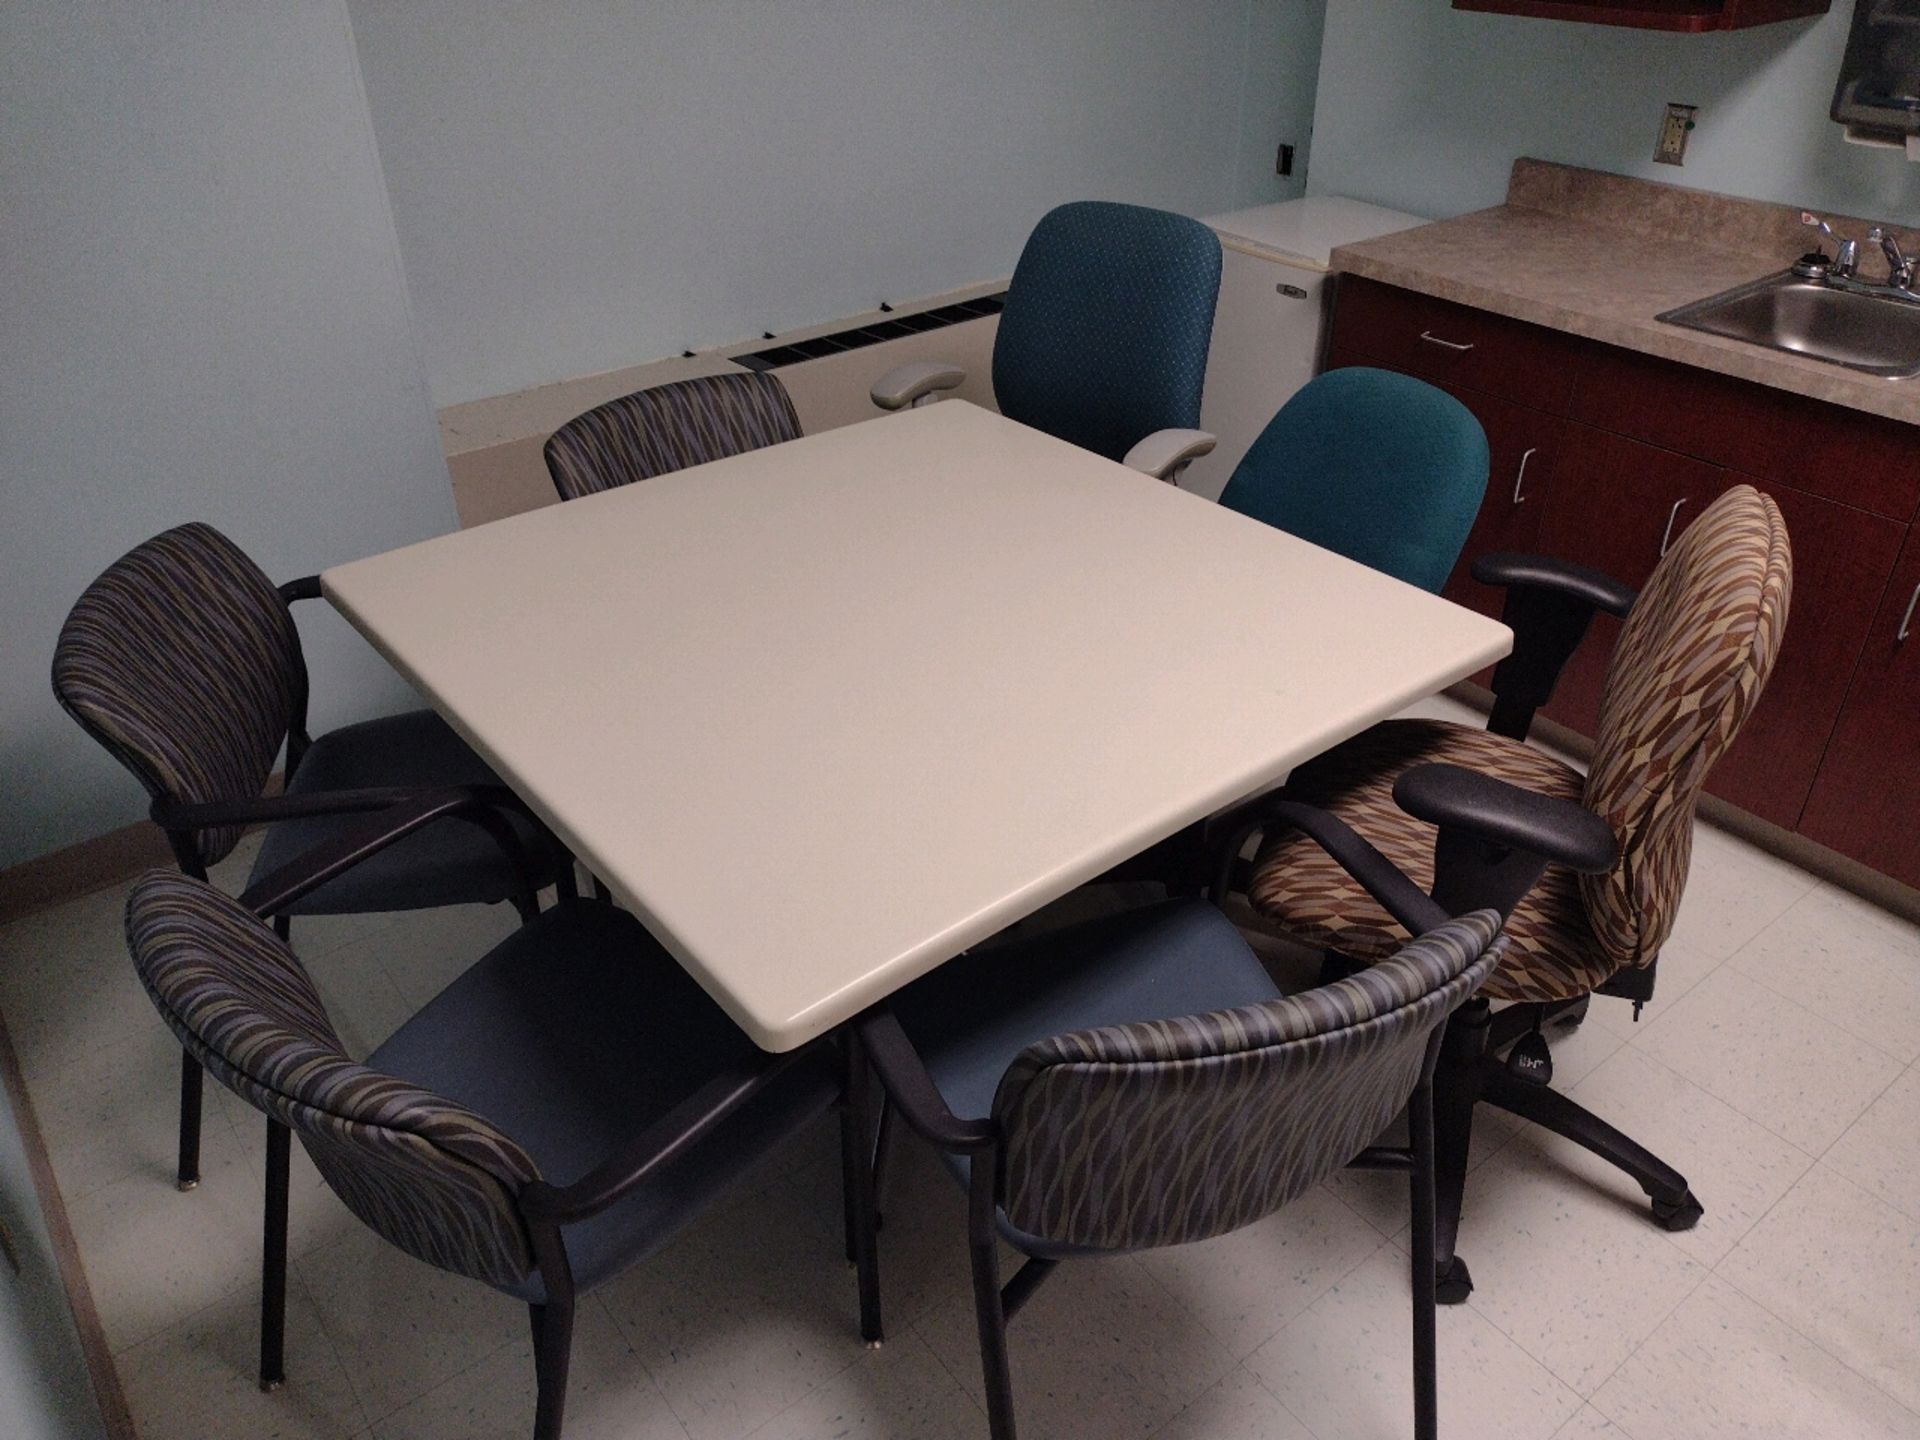 BREAK ROOM TO INCLUDE: REFRIGERATOR, MINI-REFRIGERATOR, TABLE AND CHAIRS (ICE MACHINE NOT INCLUDED)